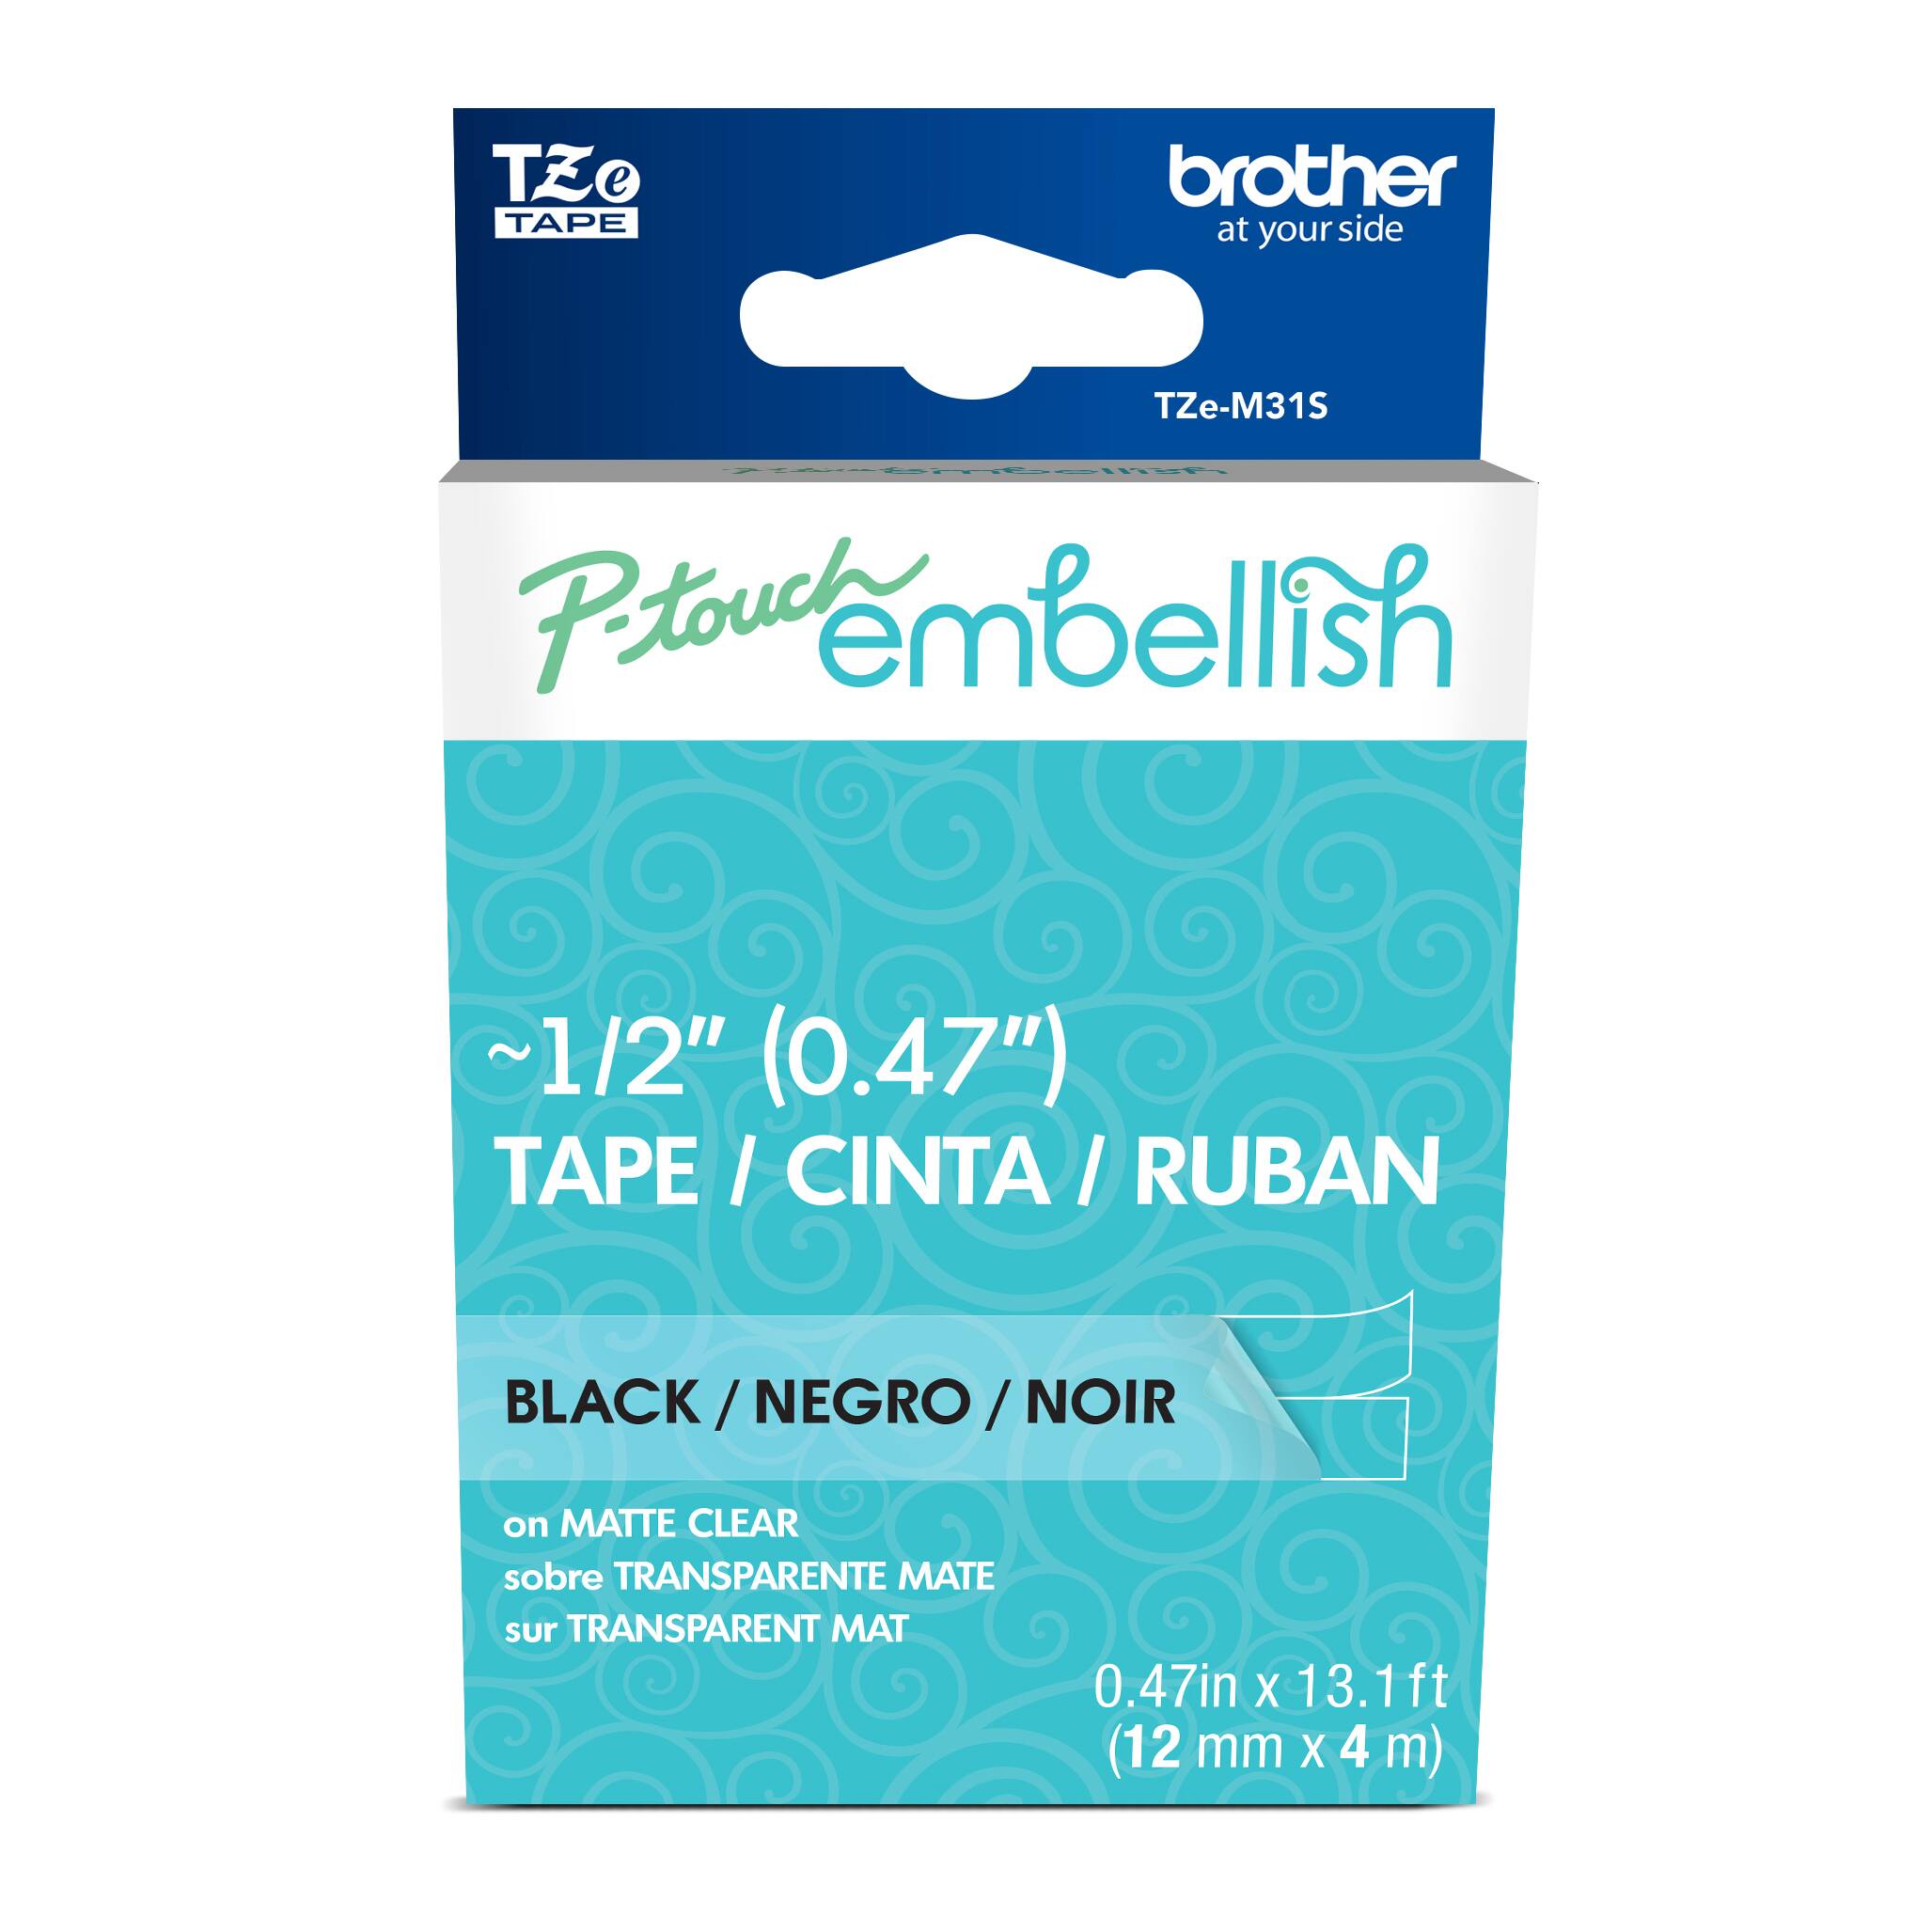 6 Pack: Brother P-touch Embellish Tape, Black on Matte Clear